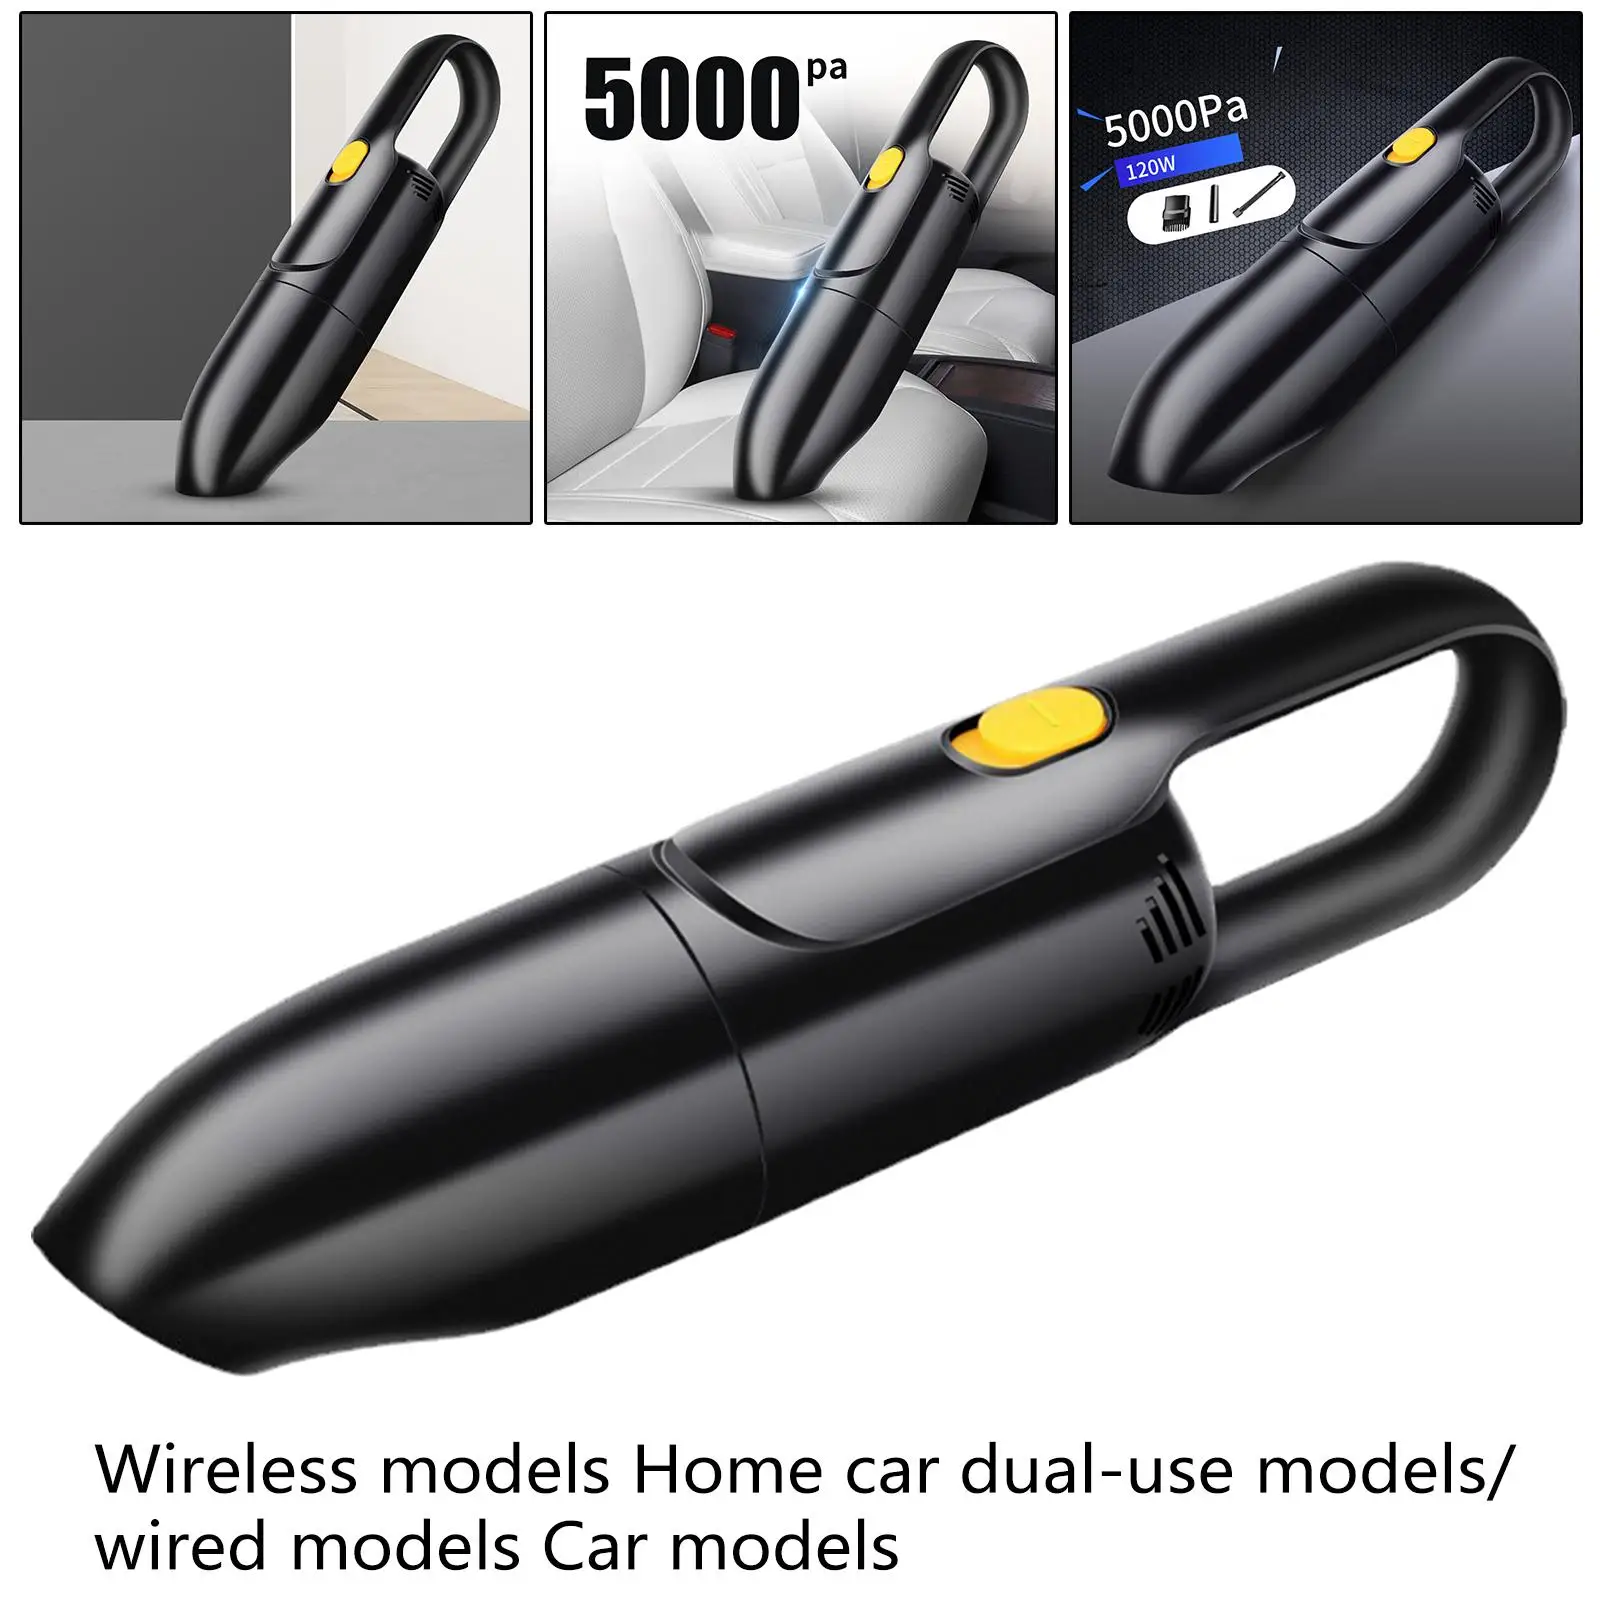 Portable Mini Vacuum Cleaner with Filter Car Vacuum Cleaner Fit for Pet Hair Cleaning Home